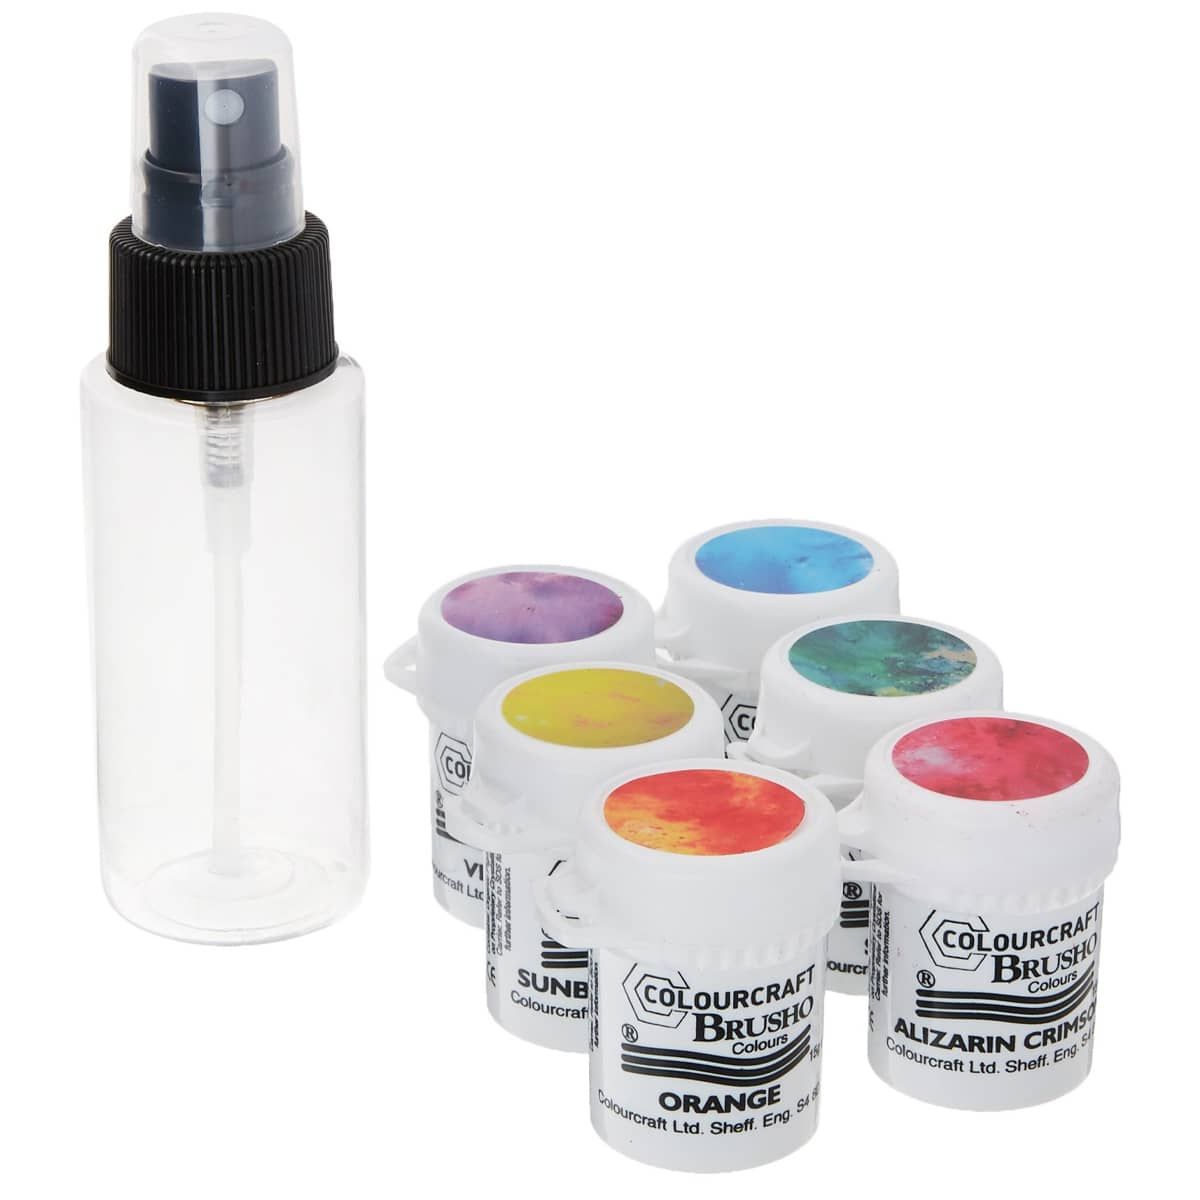 Brusho Crystal Watercolours Craft SpRitzer Set of 6, 15 grams